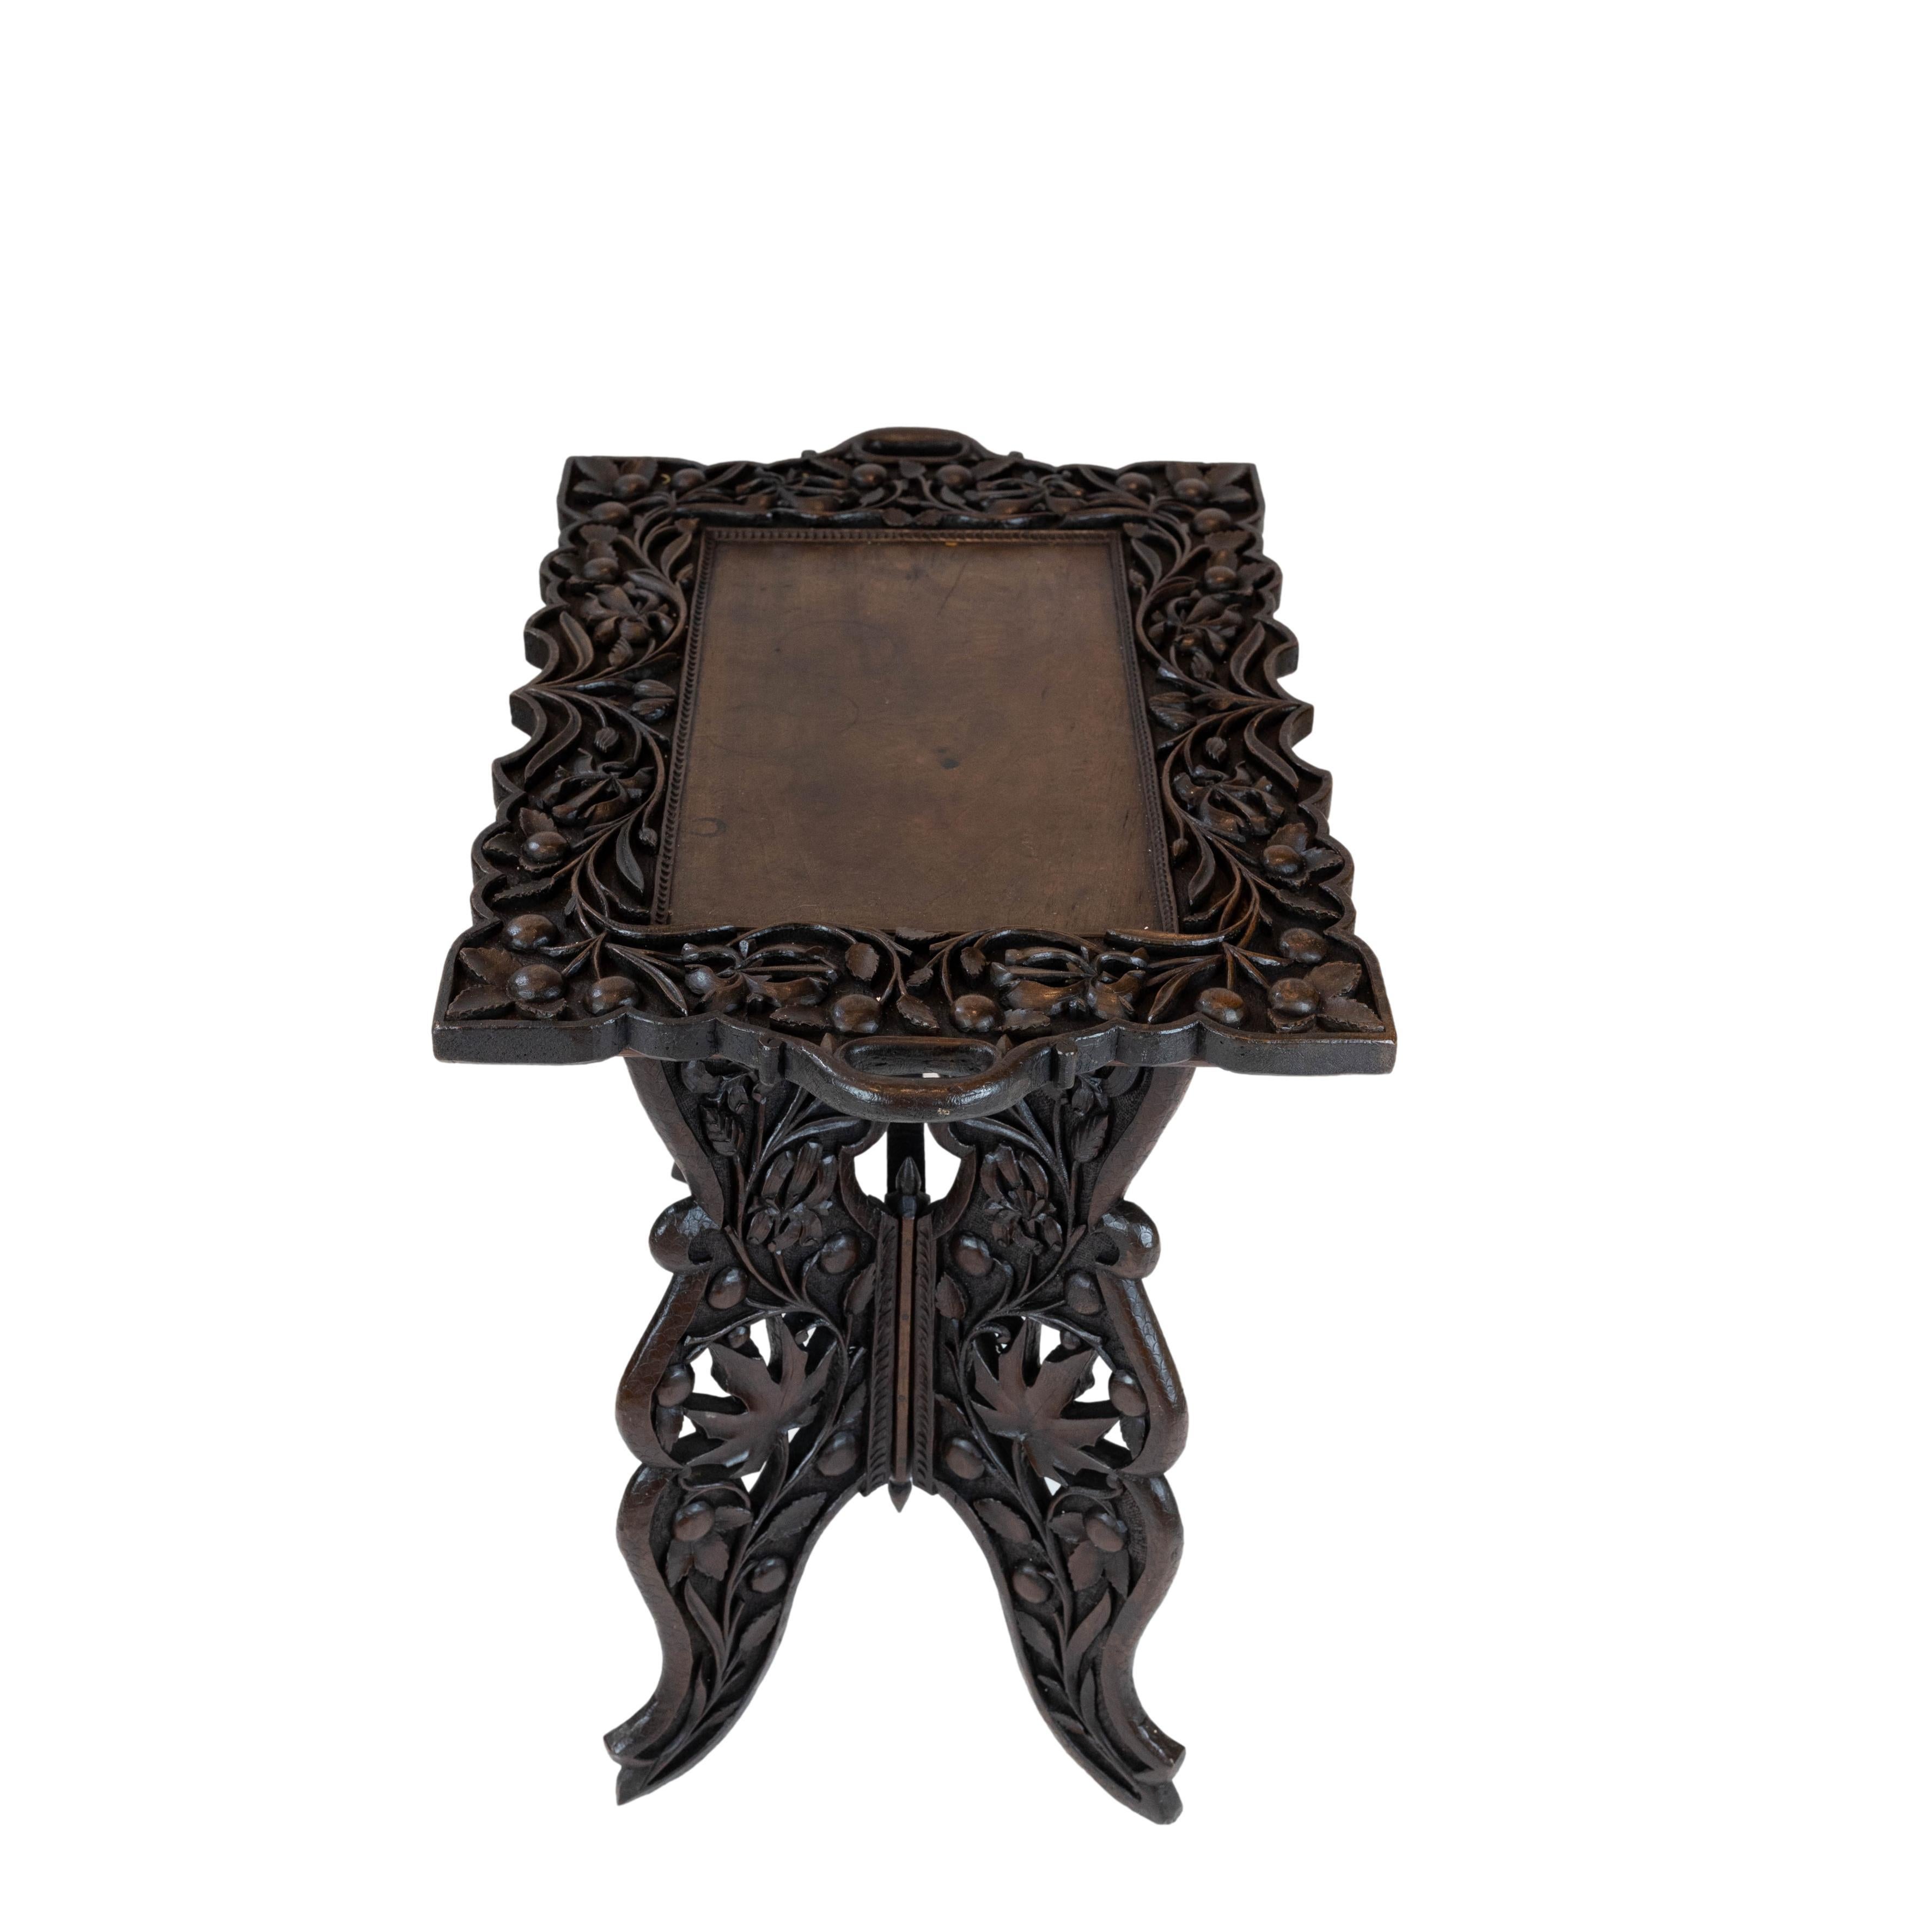 Elaborately Hand-Carved Solid Walnut Campaign Tray-Top Table, English, ca. 1890 For Sale 5